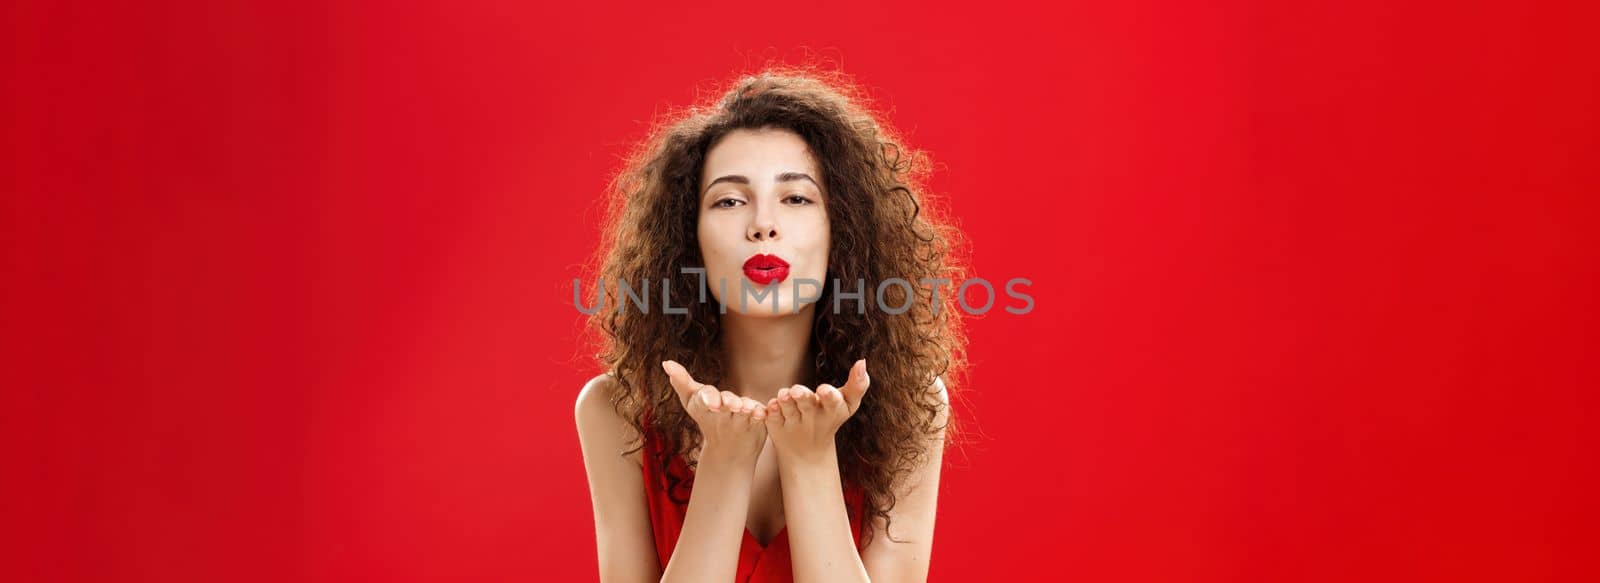 Woman rewards boyfriend with passionate wind kiss after romantic date. Portrait of sensual hot adult female in red elegant dress with curly hairstyle bending towards camera sending mwah flirty by Benzoix